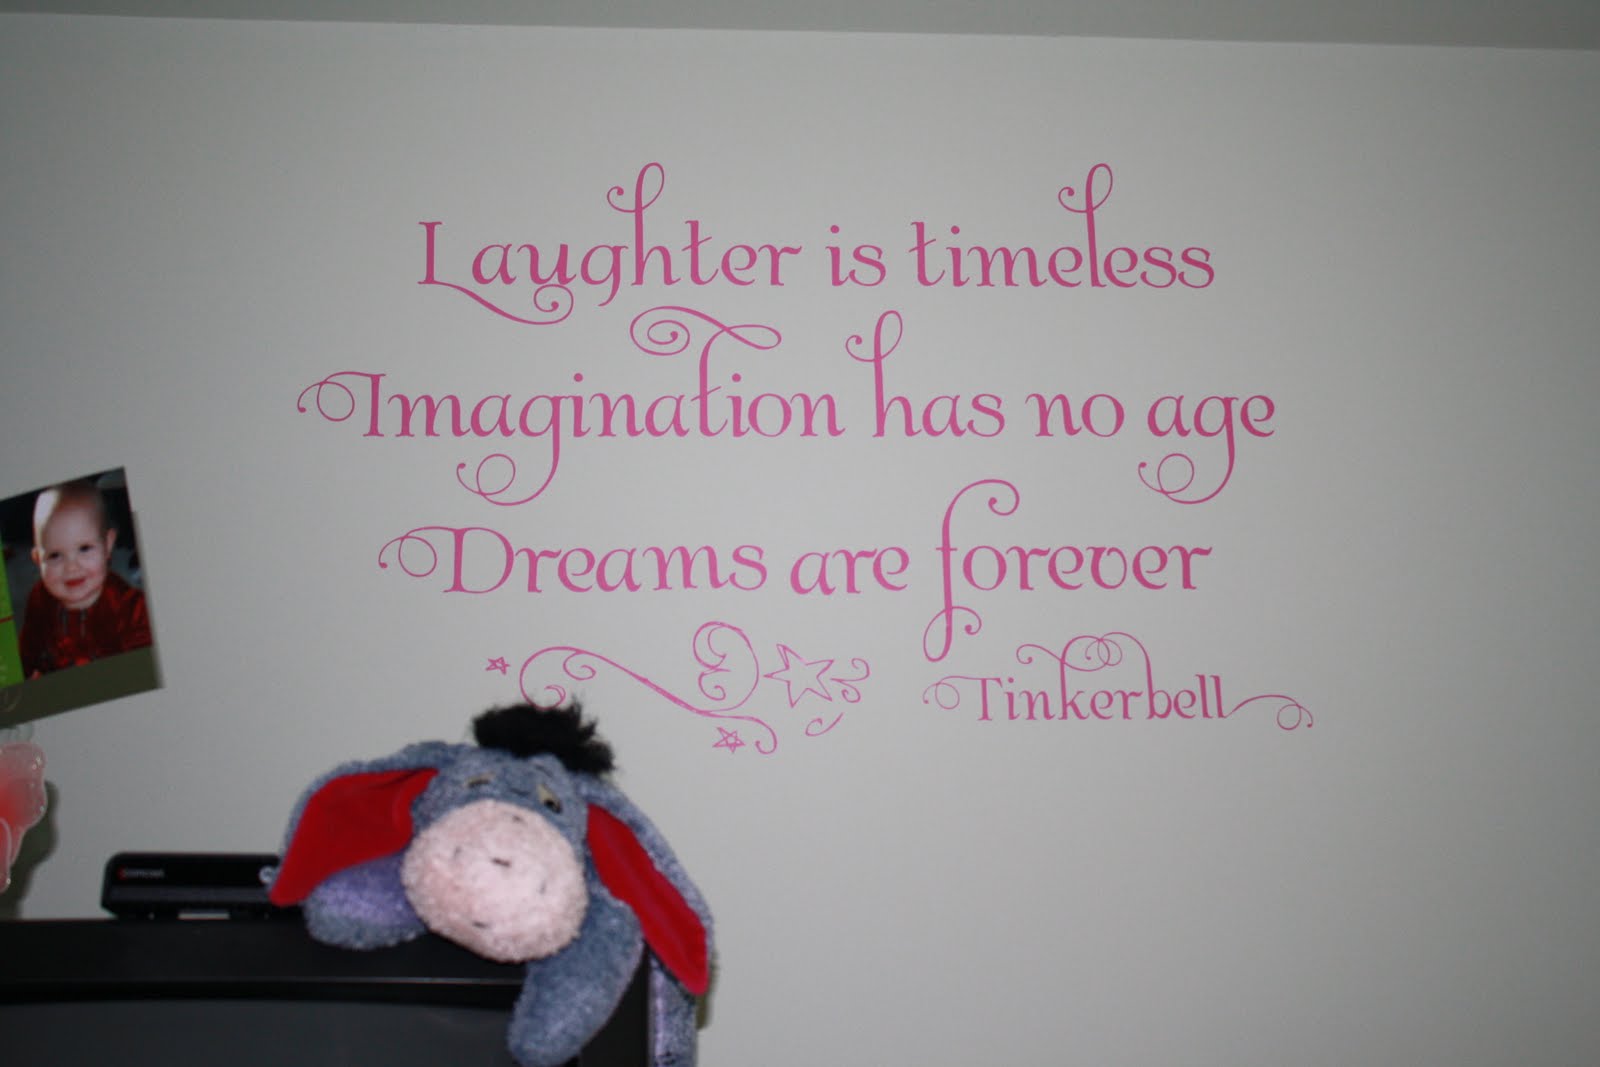 cool cake ideas for teenage girls First, we spruced up the girls' room with this wall quote: